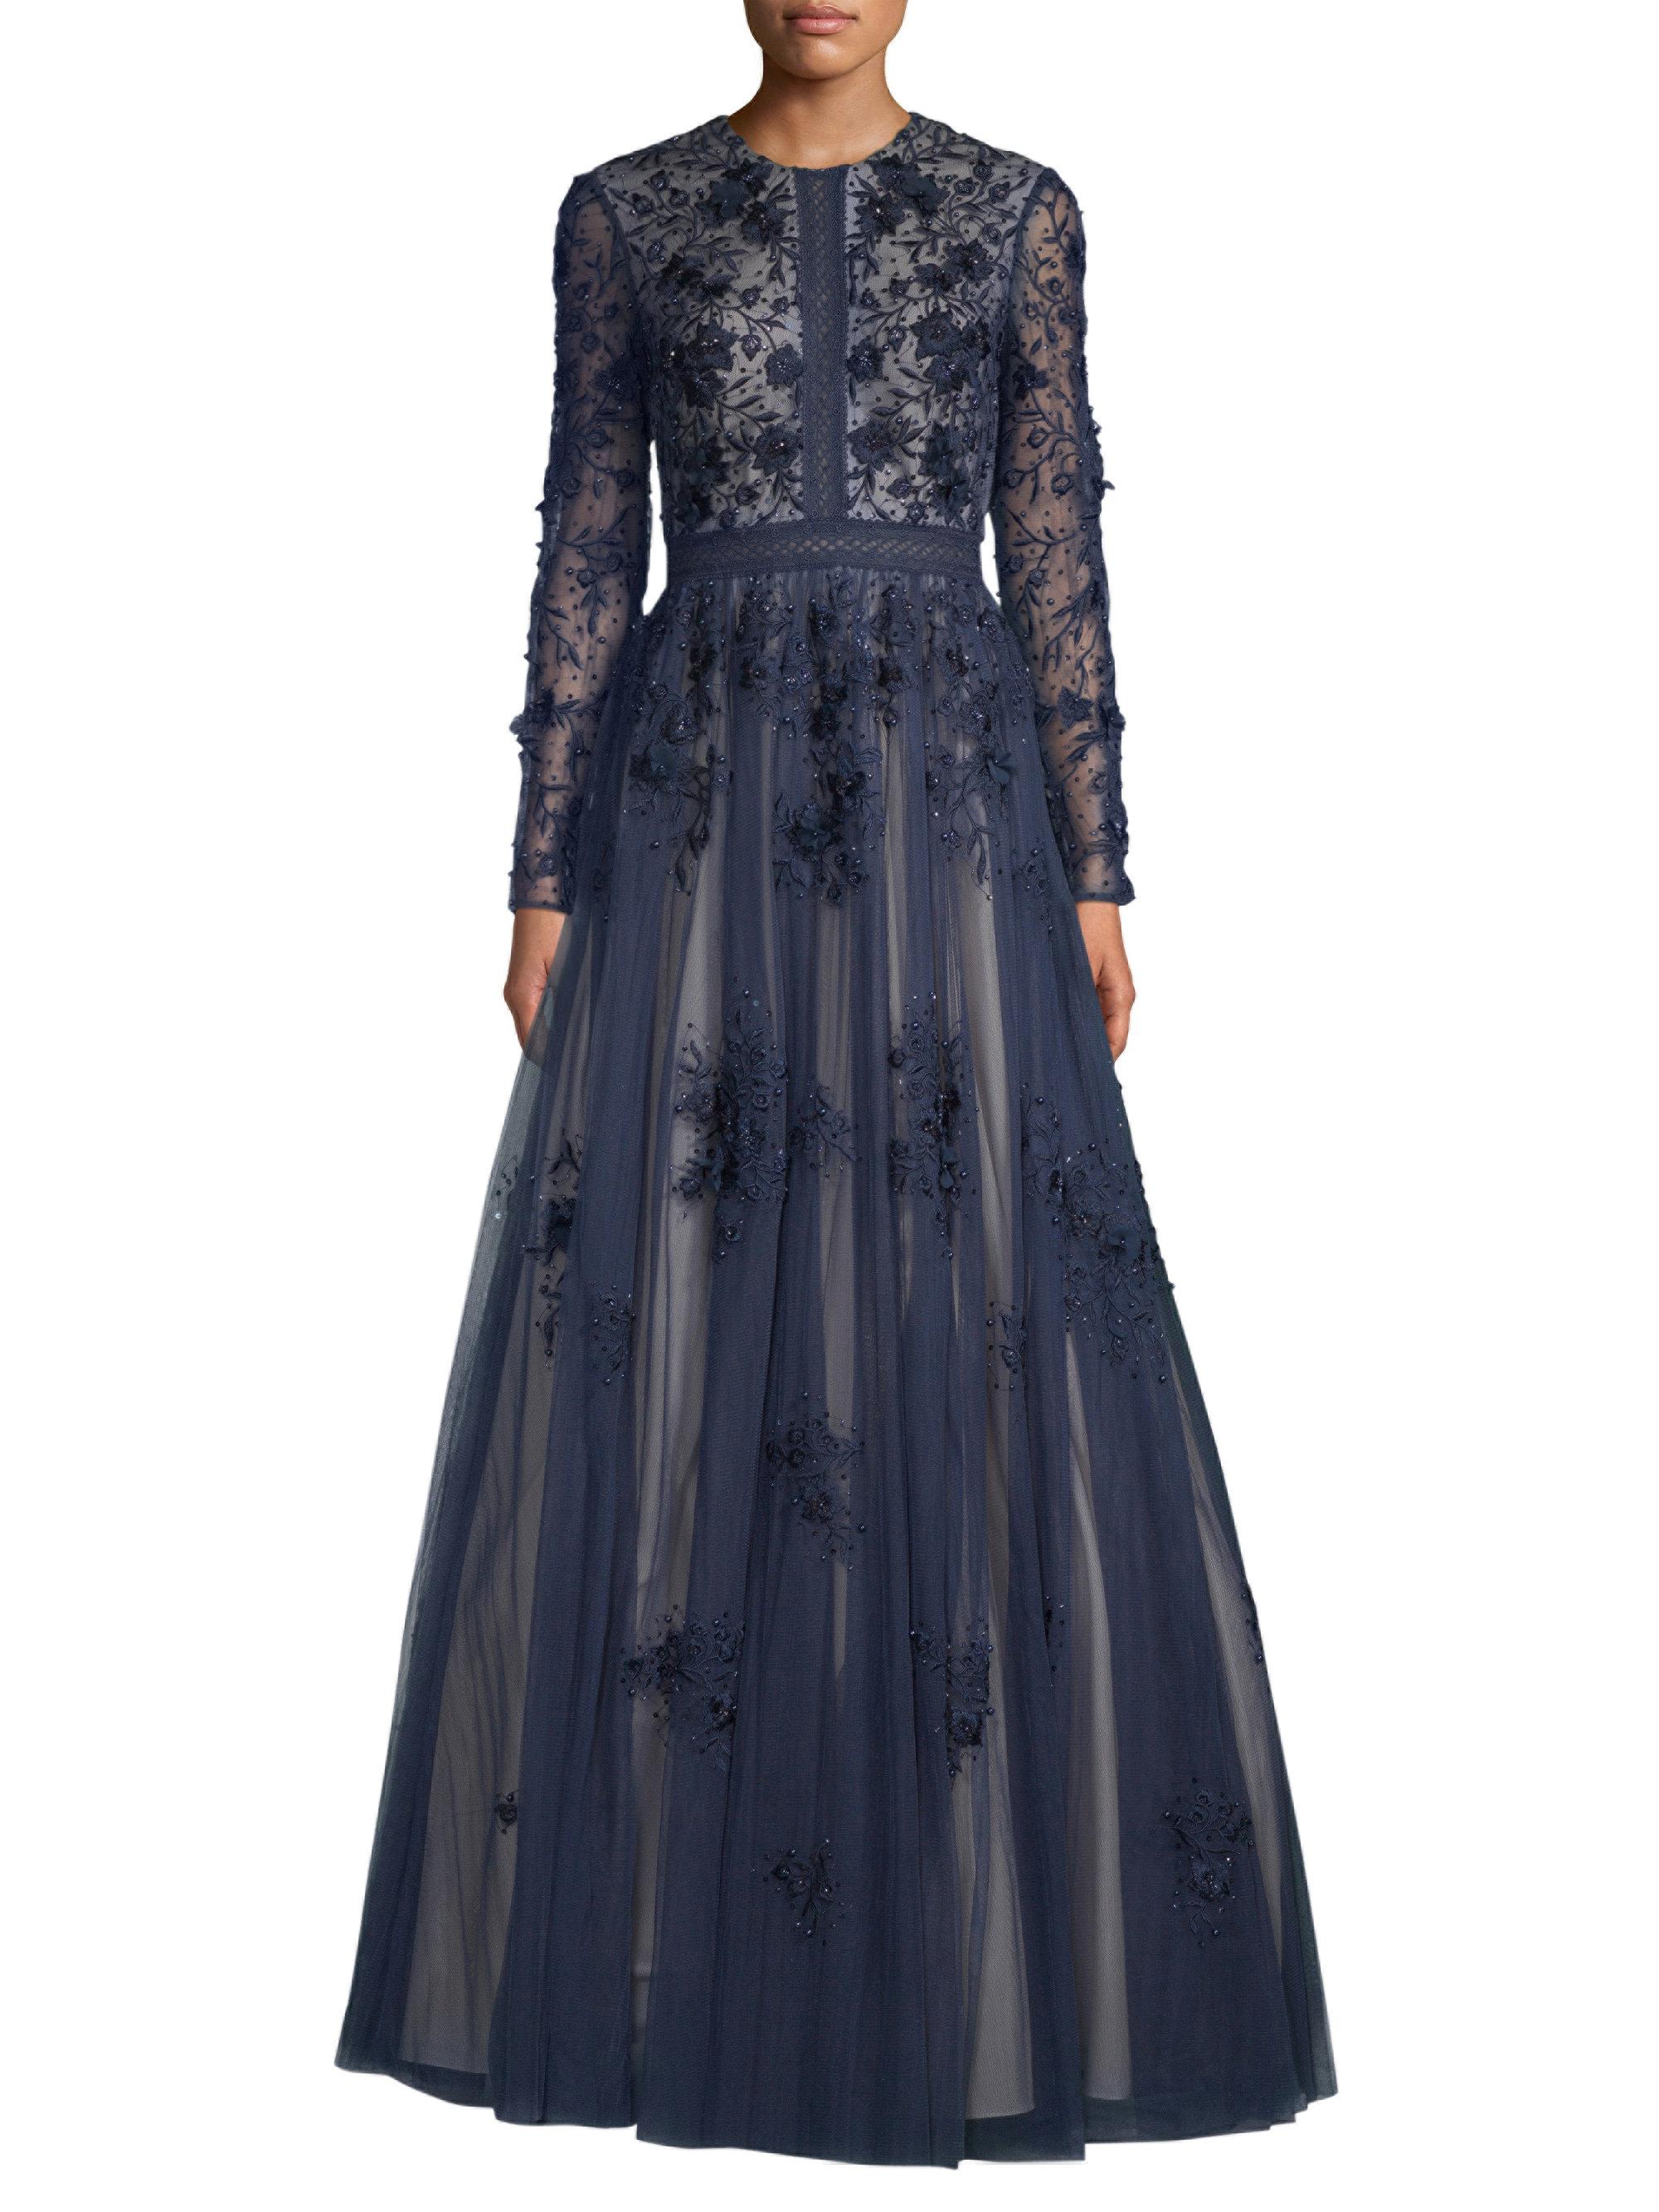 Long-sleeve Floral A-line Gown in Navy ...